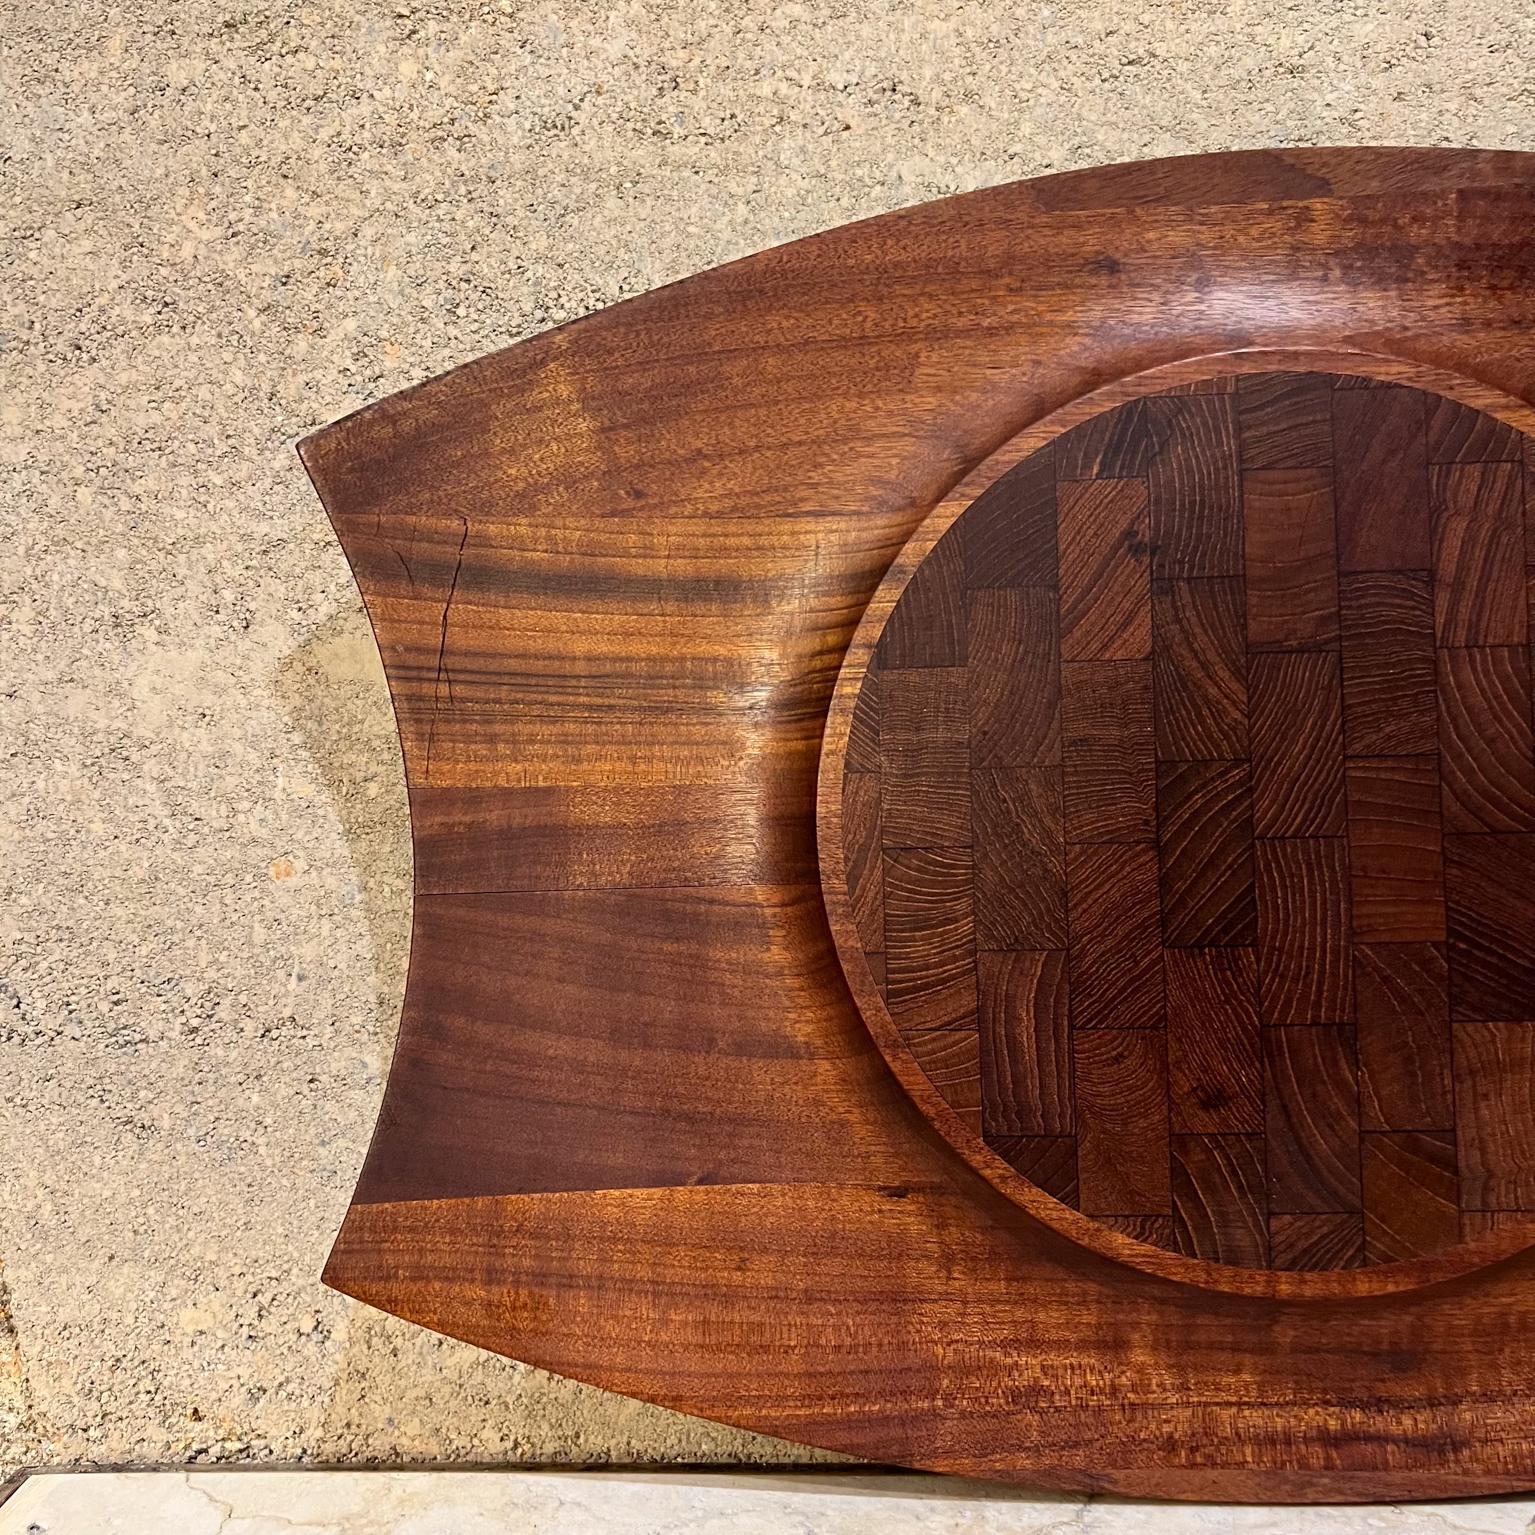 
1960s Jens Quistgaard Dansk Rare Woods Sculpted Modern Tray Denmark
Charcuterie Board Cutting Cheese Platter Serving Piece
Staved Teak
maker stamped
1.5 H 14 D x 19.75 W
Preowned original vintage condition
See images provided